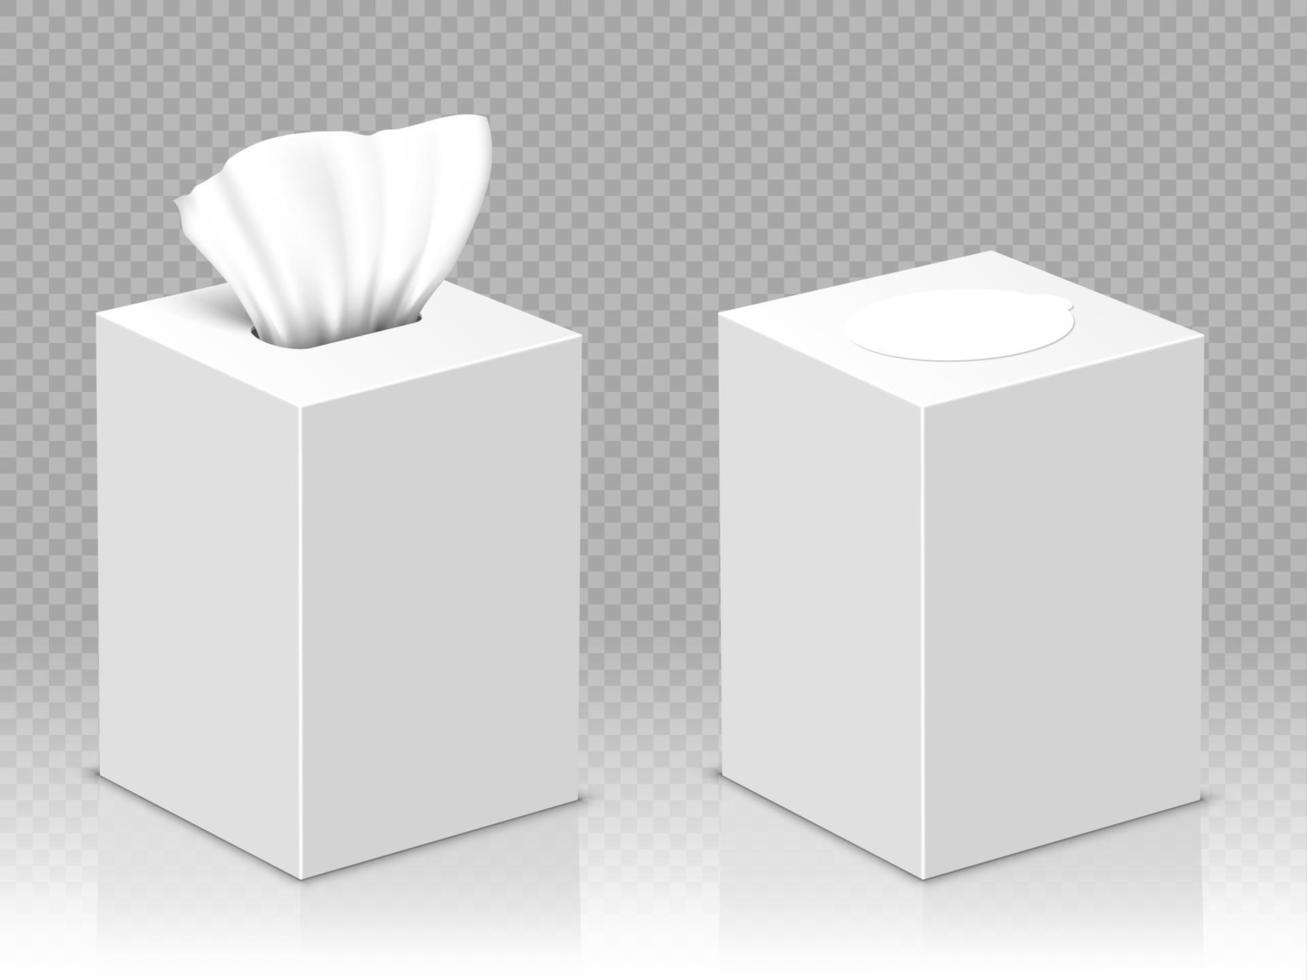 Open and closed box with white paper napkins vector